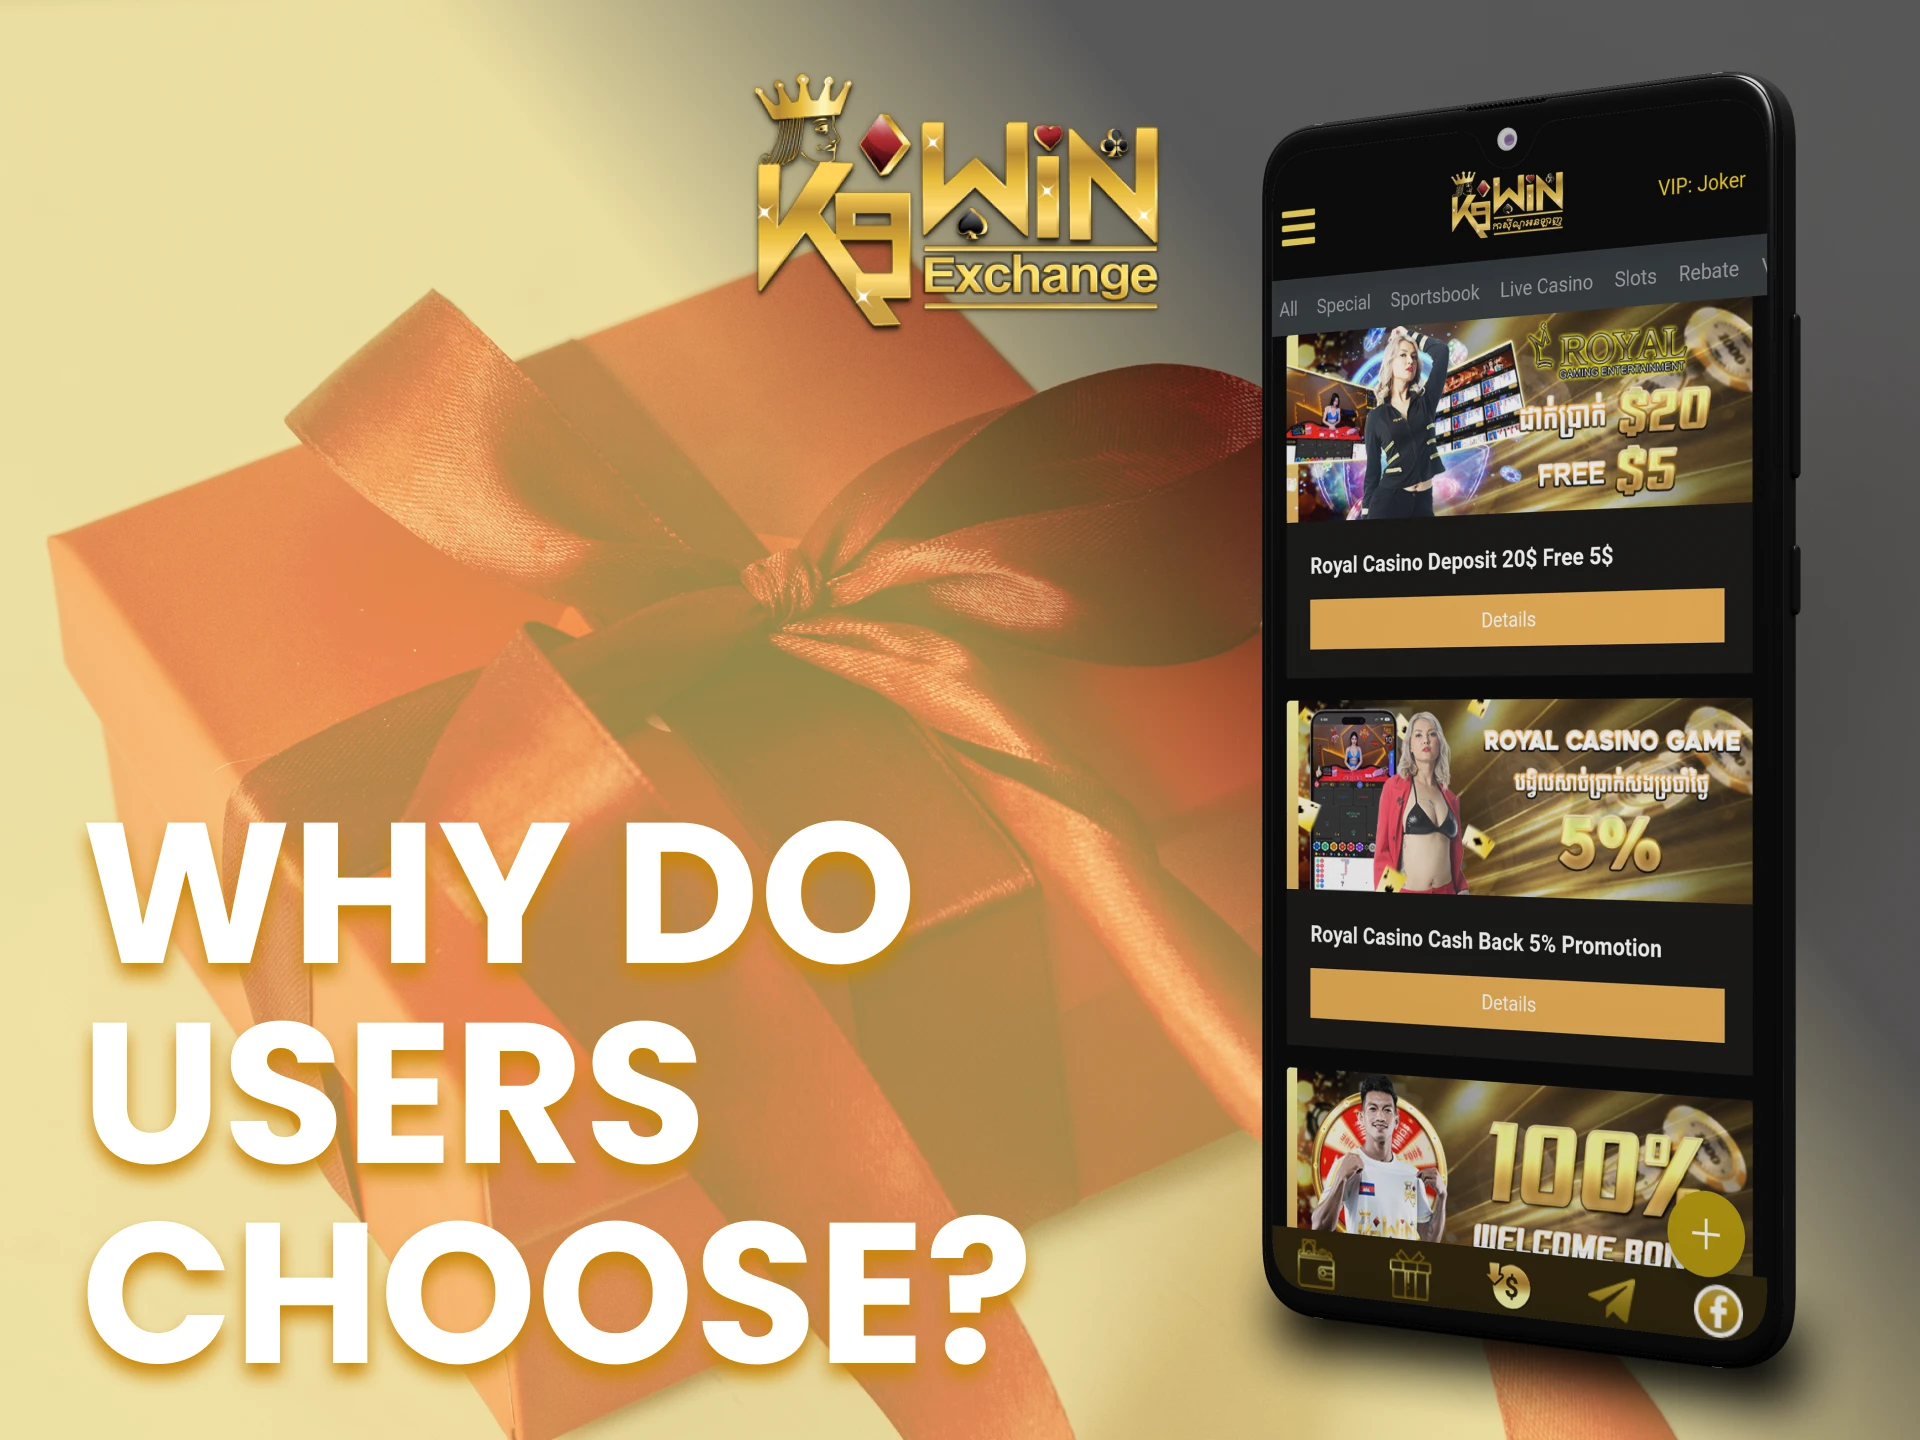 Choose the K9Win app for making bets and playing casino games.